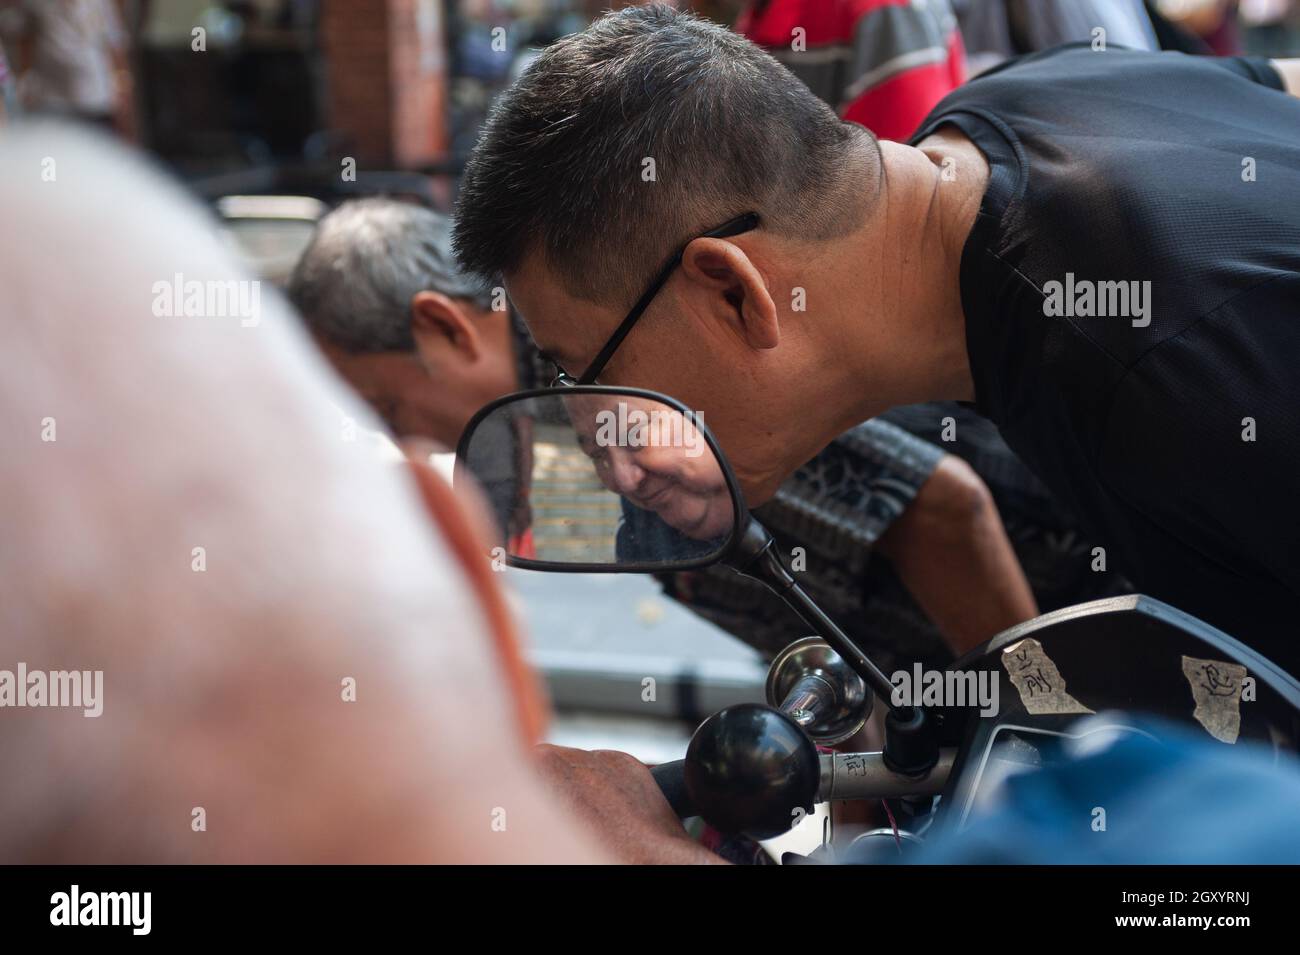 04.04.2018, Singapore, Republic of Singapore, Asia - The face of an old man is reflected in a rearview mirror at Kreta Ayer Square in Chinatown. Stock Photo